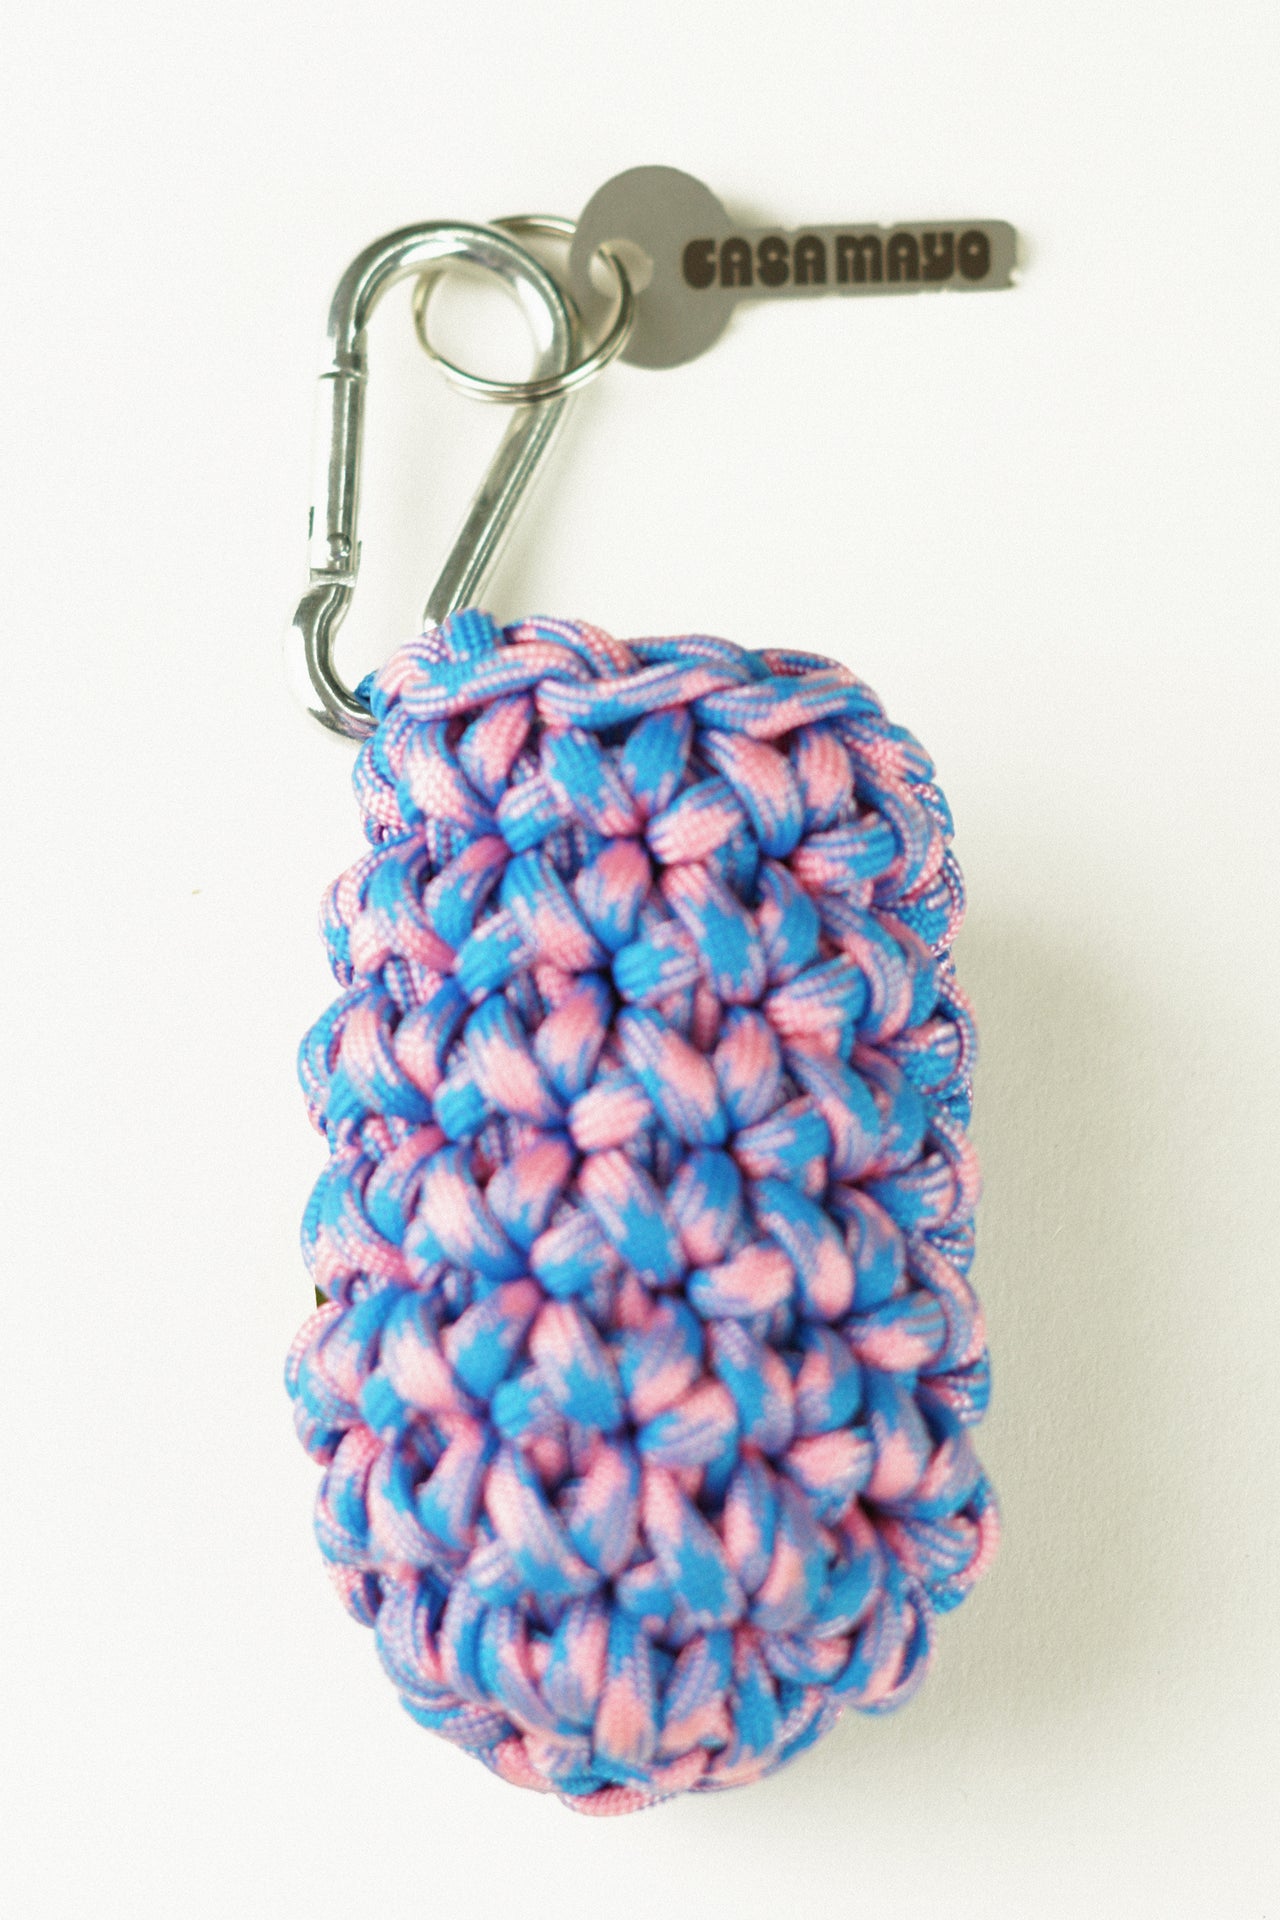 Blue and pink pet bag holder made of paracord rope